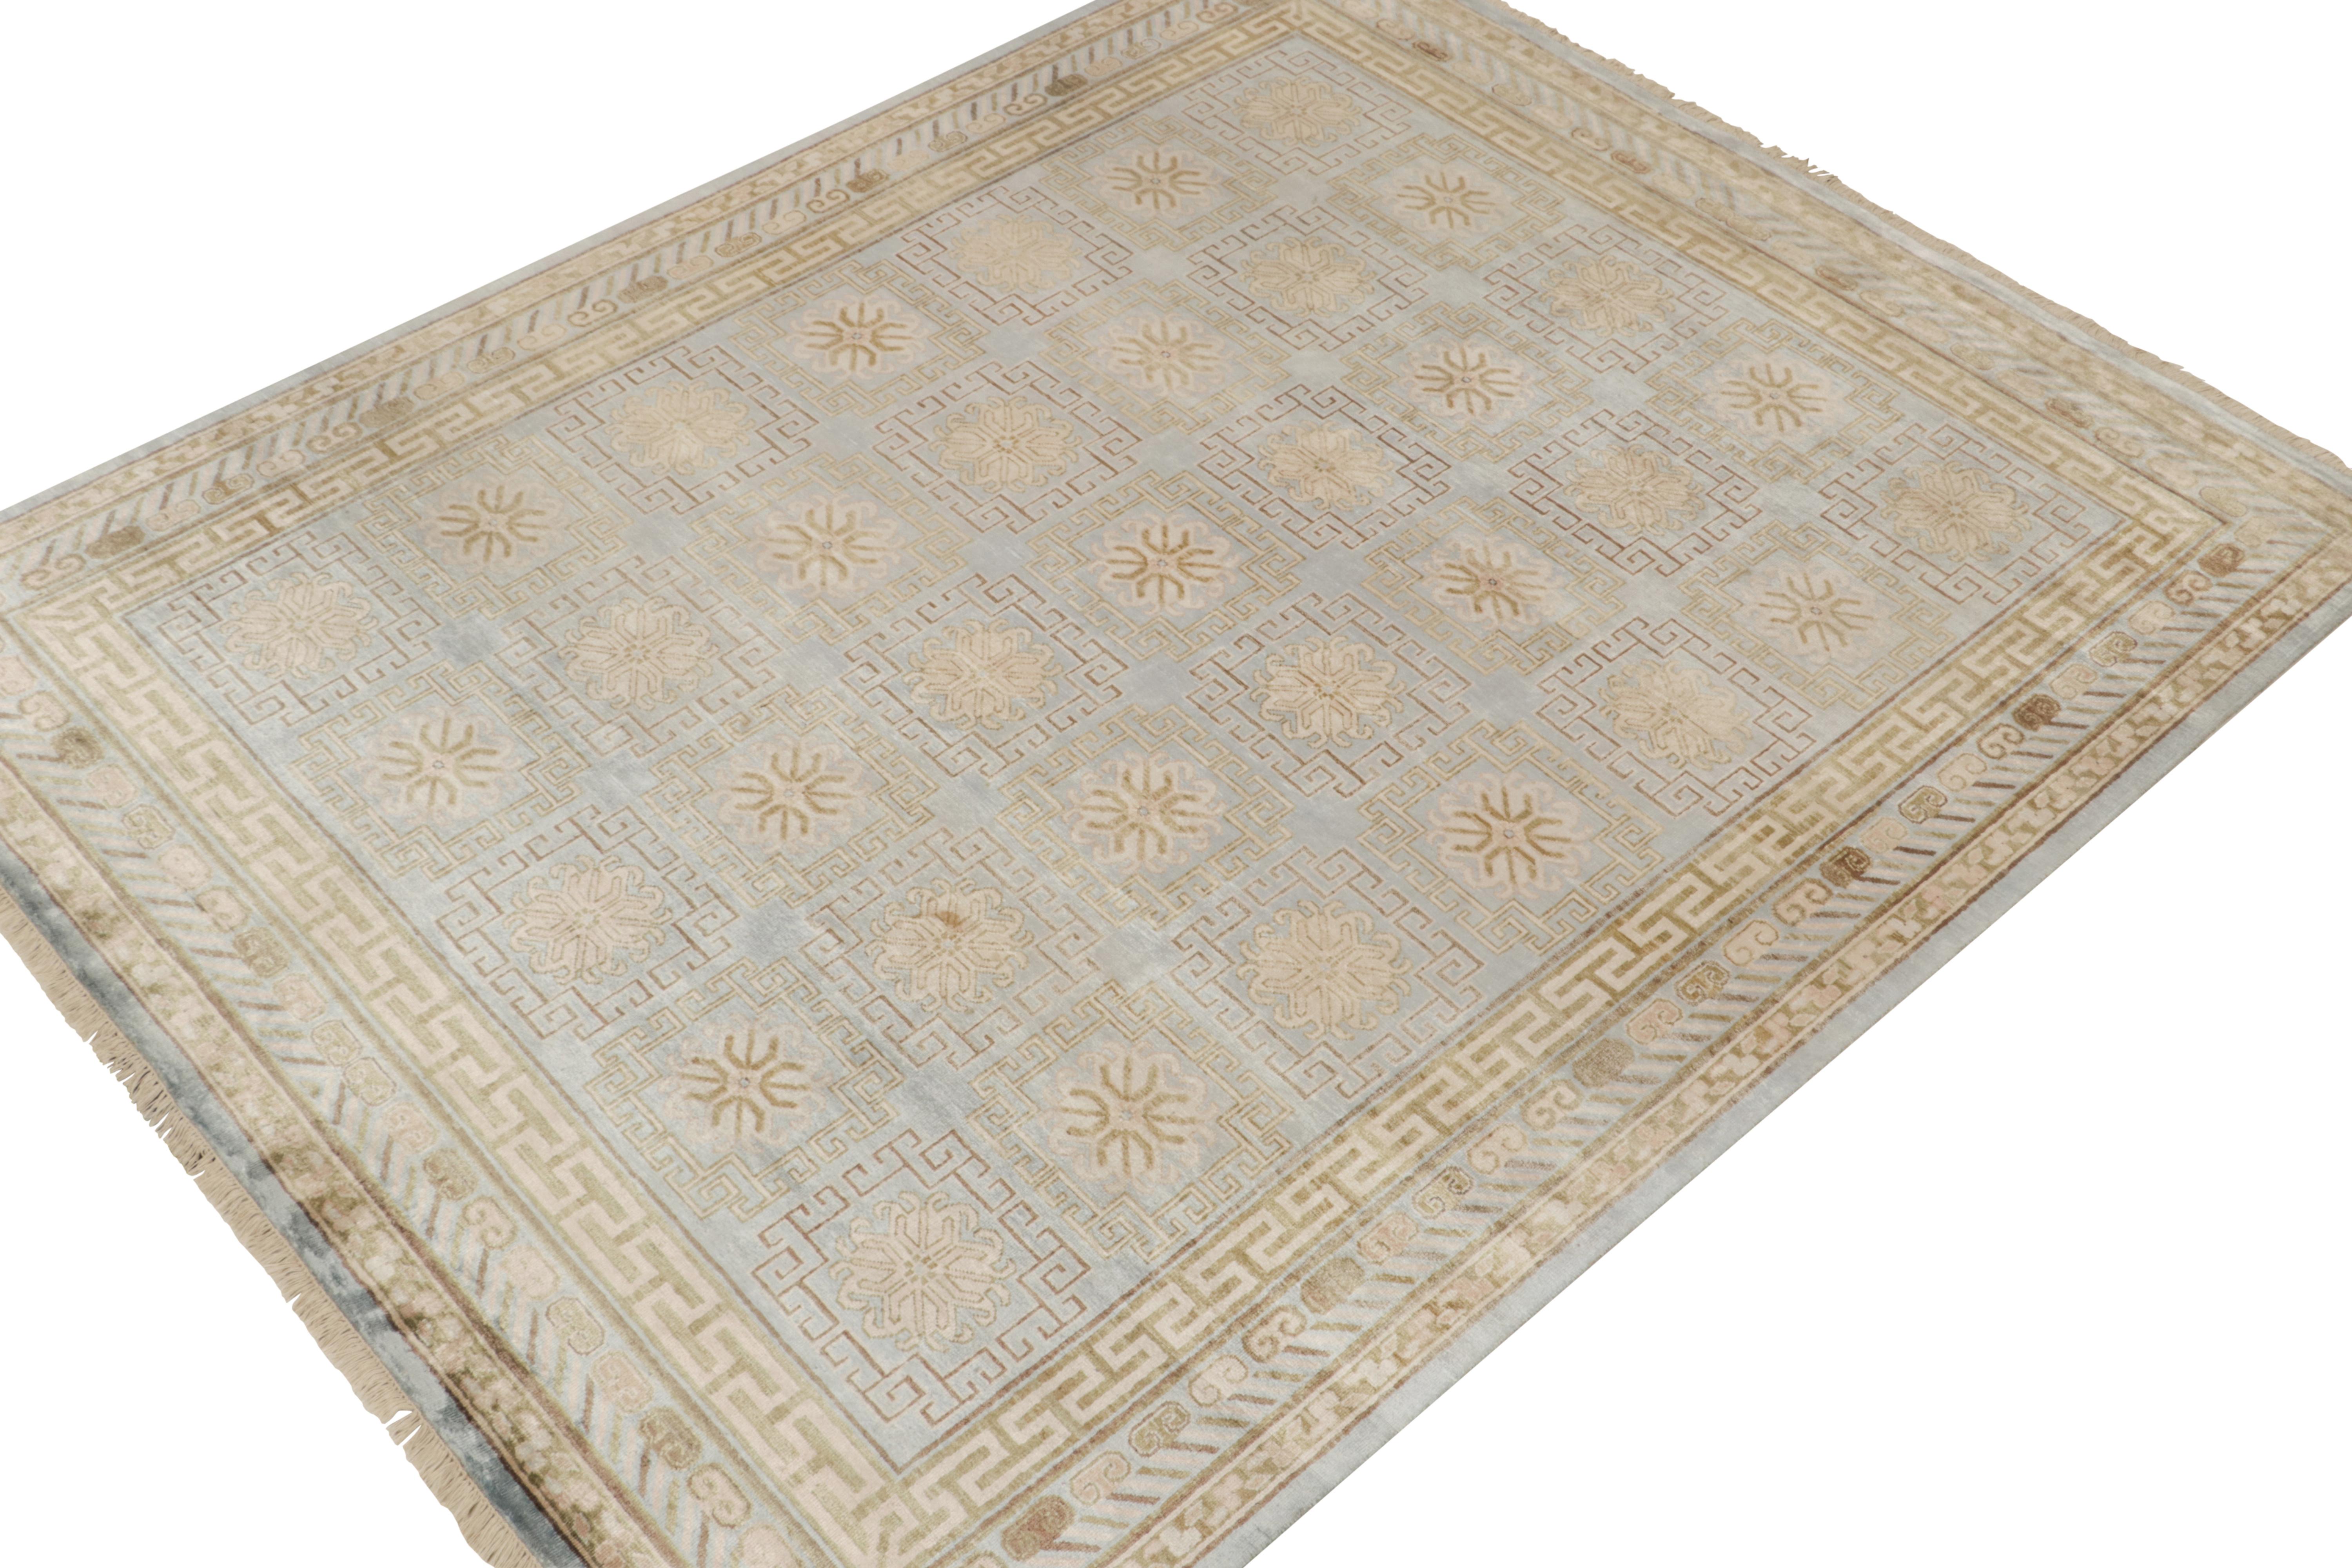 An 8x10 rug inspired from antique Khotan rug styles, from Rug & Kilim’s Modern Classics Collection. Hand-knotted in silk, playing an exceptional blue and beige-brown in medallions and geometric patterns with elegant classic grace.
Further On the